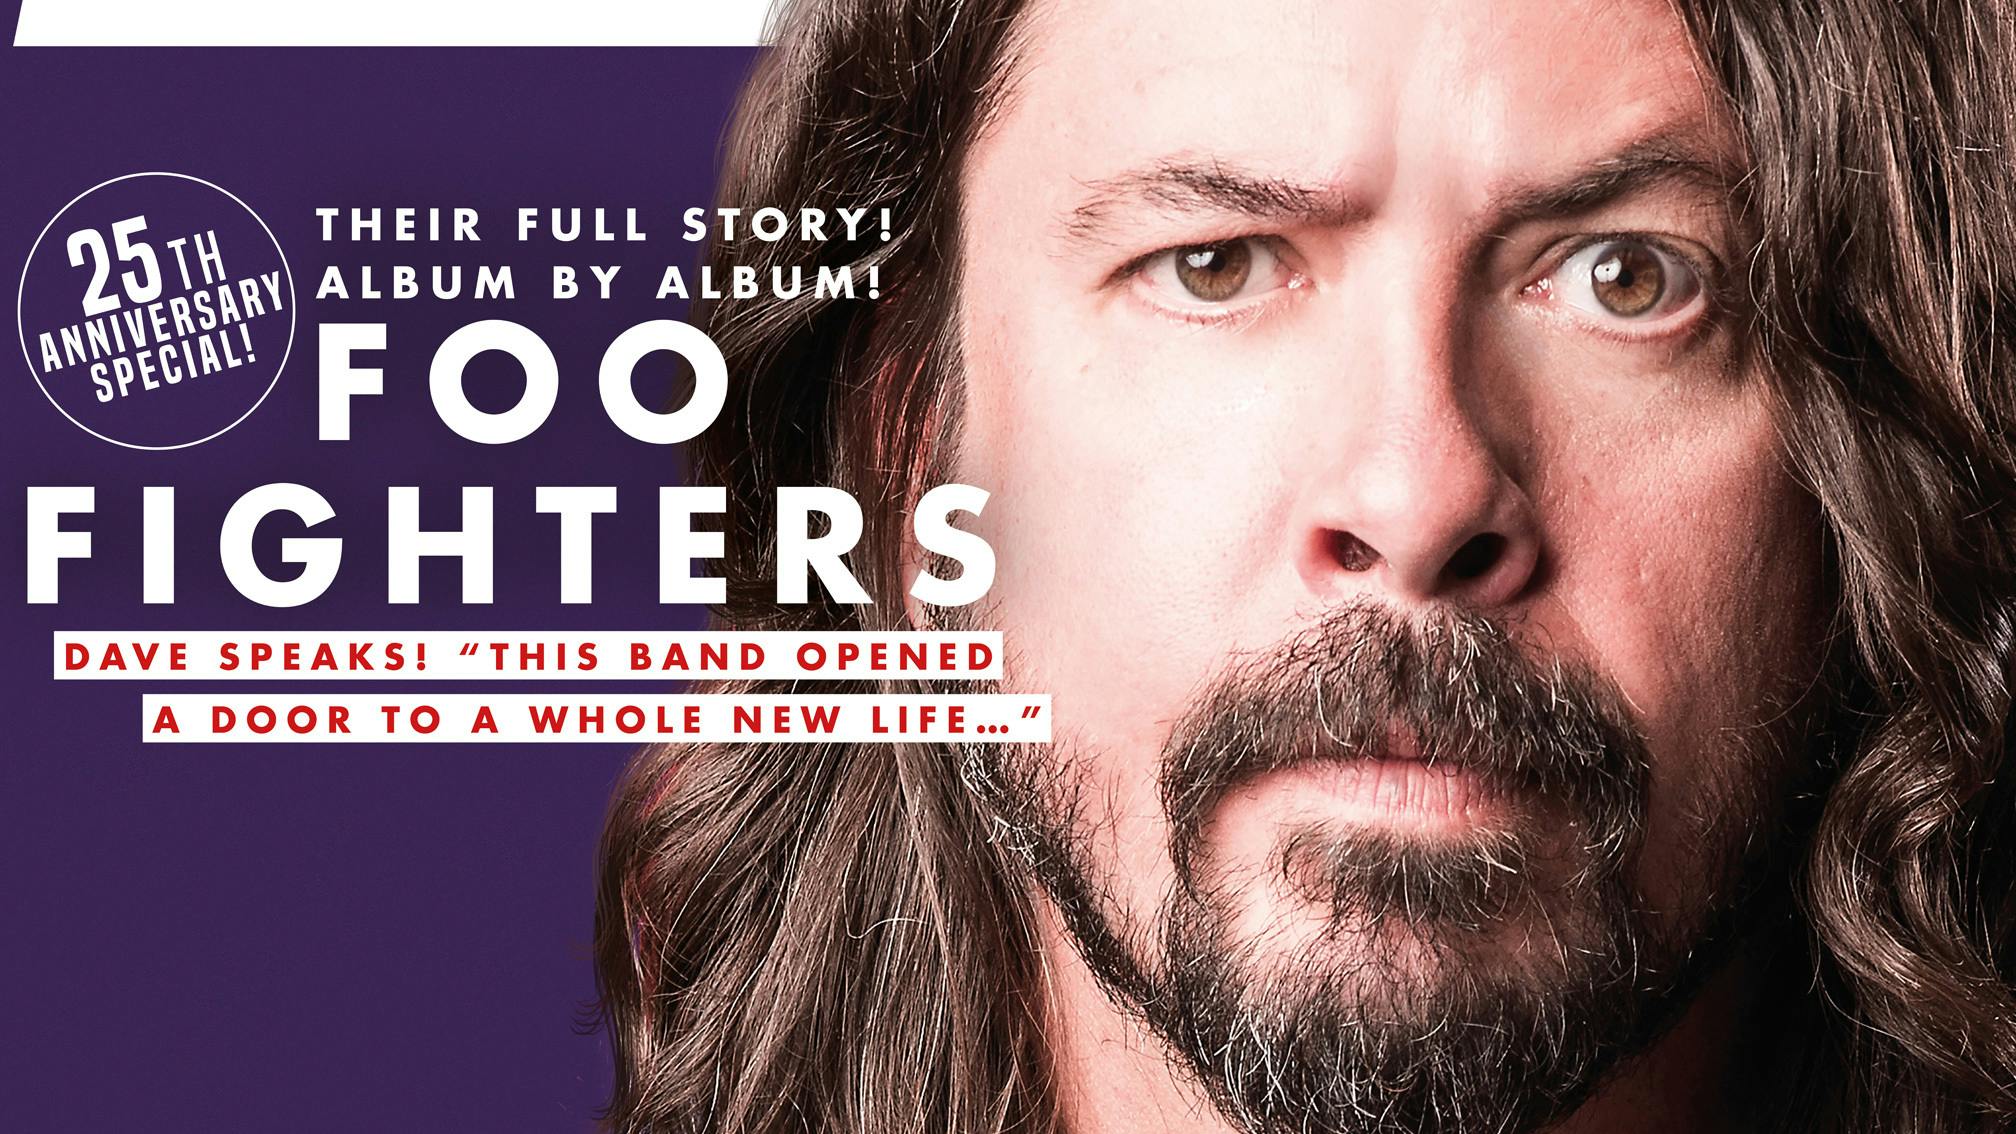 Foo Fighters' 25th Anniversary Special: "This Band Opened A Door To A Whole New Life…"